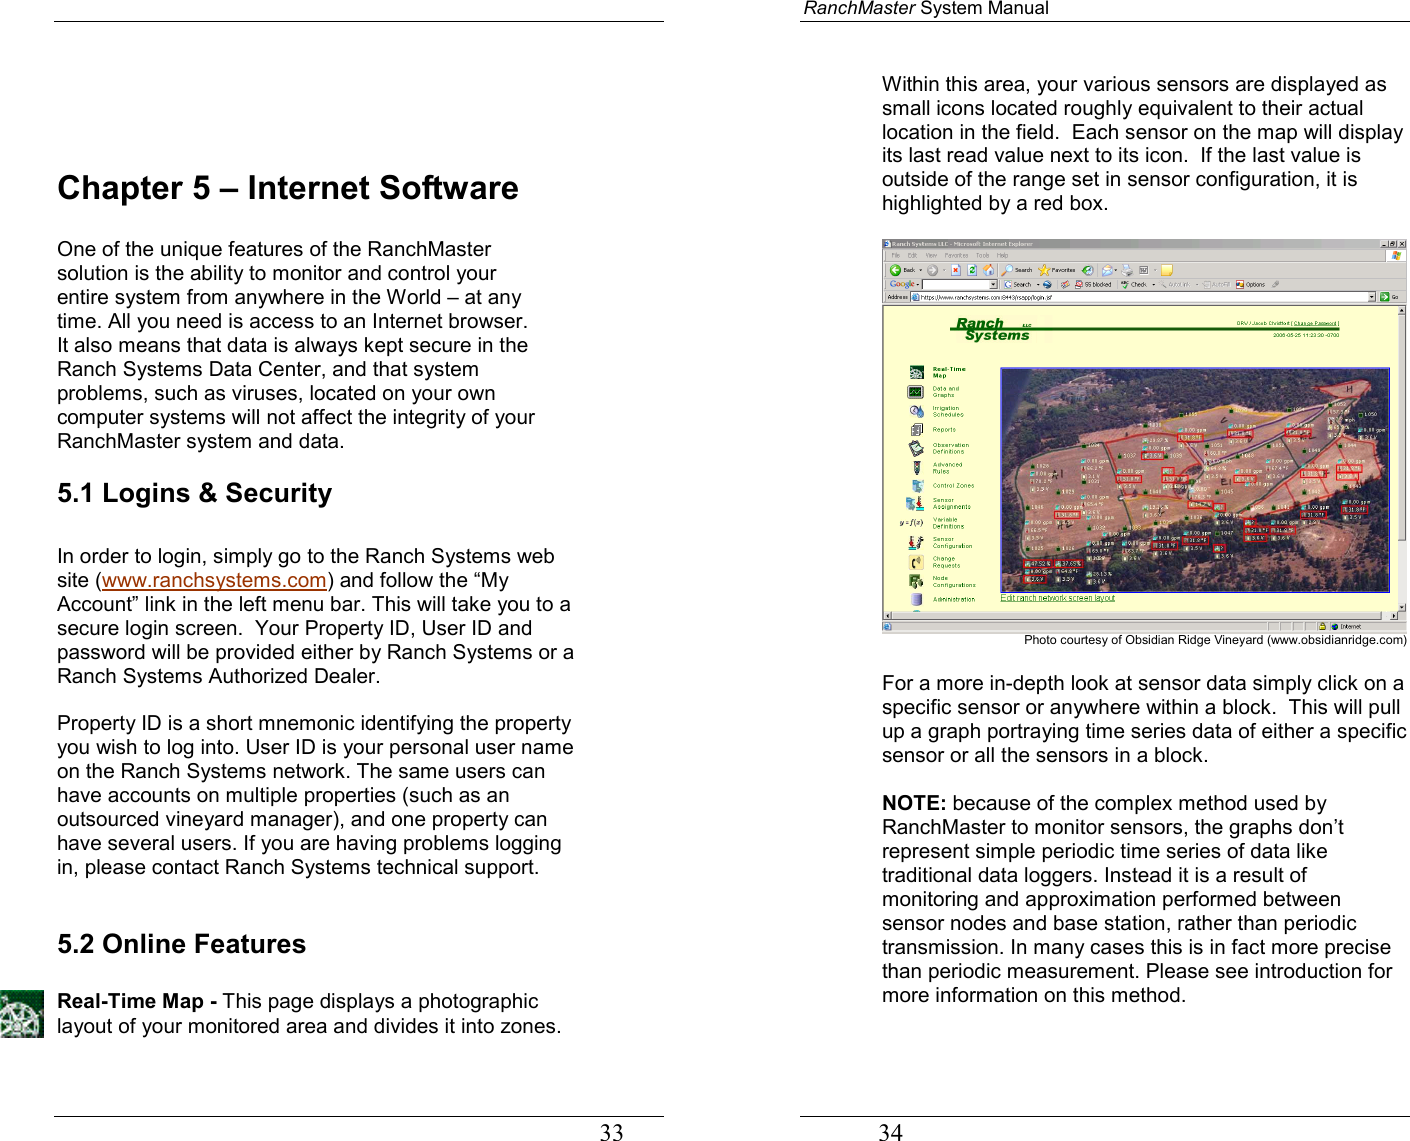                                                                                   33    Chapter 5 – Internet Software  One of the unique features of the RanchMaster solution is the ability to monitor and control your entire system from anywhere in the World – at any time. All you need is access to an Internet browser. It also means that data is always kept secure in the Ranch Systems Data Center, and that system problems, such as viruses, located on your own computer systems will not affect the integrity of your RanchMaster system and data. 5.1 Logins &amp; Security  In order to login, simply go to the Ranch Systems web site (www.ranchsystems.com) and follow the “My Account” link in the left menu bar. This will take you to a secure login screen.  Your Property ID, User ID and password will be provided either by Ranch Systems or a Ranch Systems Authorized Dealer.    Property ID is a short mnemonic identifying the property you wish to log into. User ID is your personal user name on the Ranch Systems network. The same users can have accounts on multiple properties (such as an outsourced vineyard manager), and one property can have several users. If you are having problems logging in, please contact Ranch Systems technical support.  5.2 Online Features   Real-Time Map - This page displays a photographic layout of your monitored area and divides it into zones.  RanchMaster System Manual             34 Within this area, your various sensors are displayed as small icons located roughly equivalent to their actual location in the field.  Each sensor on the map will display its last read value next to its icon.  If the last value is outside of the range set in sensor configuration, it is highlighted by a red box.   Photo courtesy of Obsidian Ridge Vineyard (www.obsidianridge.com)  For a more in-depth look at sensor data simply click on a specific sensor or anywhere within a block.  This will pull up a graph portraying time series data of either a specific sensor or all the sensors in a block.  NOTE: because of the complex method used by RanchMaster to monitor sensors, the graphs don’t represent simple periodic time series of data like traditional data loggers. Instead it is a result of monitoring and approximation performed between sensor nodes and base station, rather than periodic transmission. In many cases this is in fact more precise than periodic measurement. Please see introduction for more information on this method.  